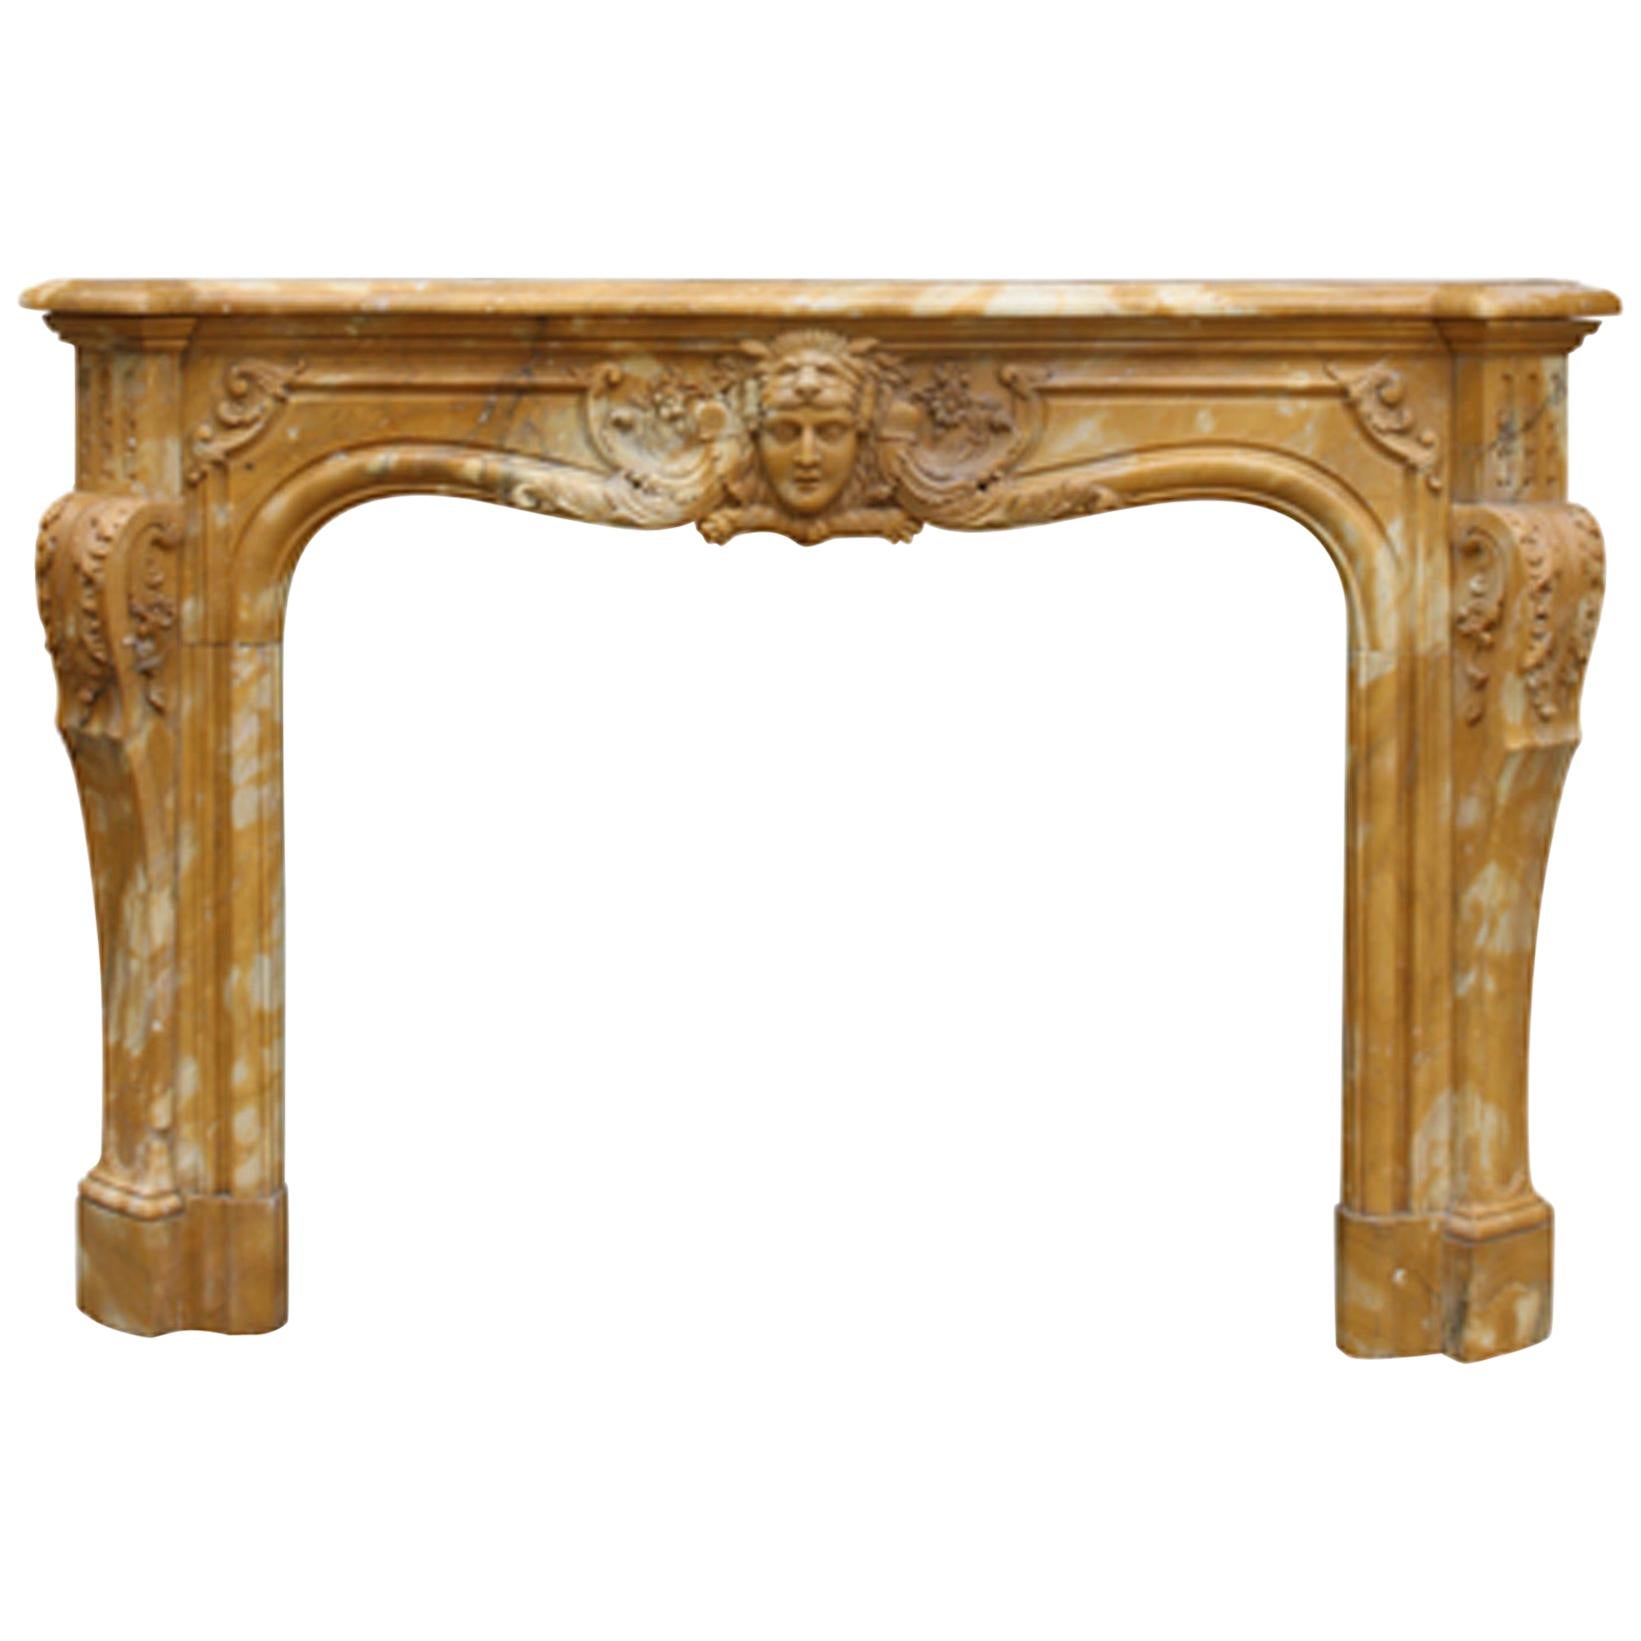 Large Sienna Marble Chimneypiece in Louis XV Manner For Sale